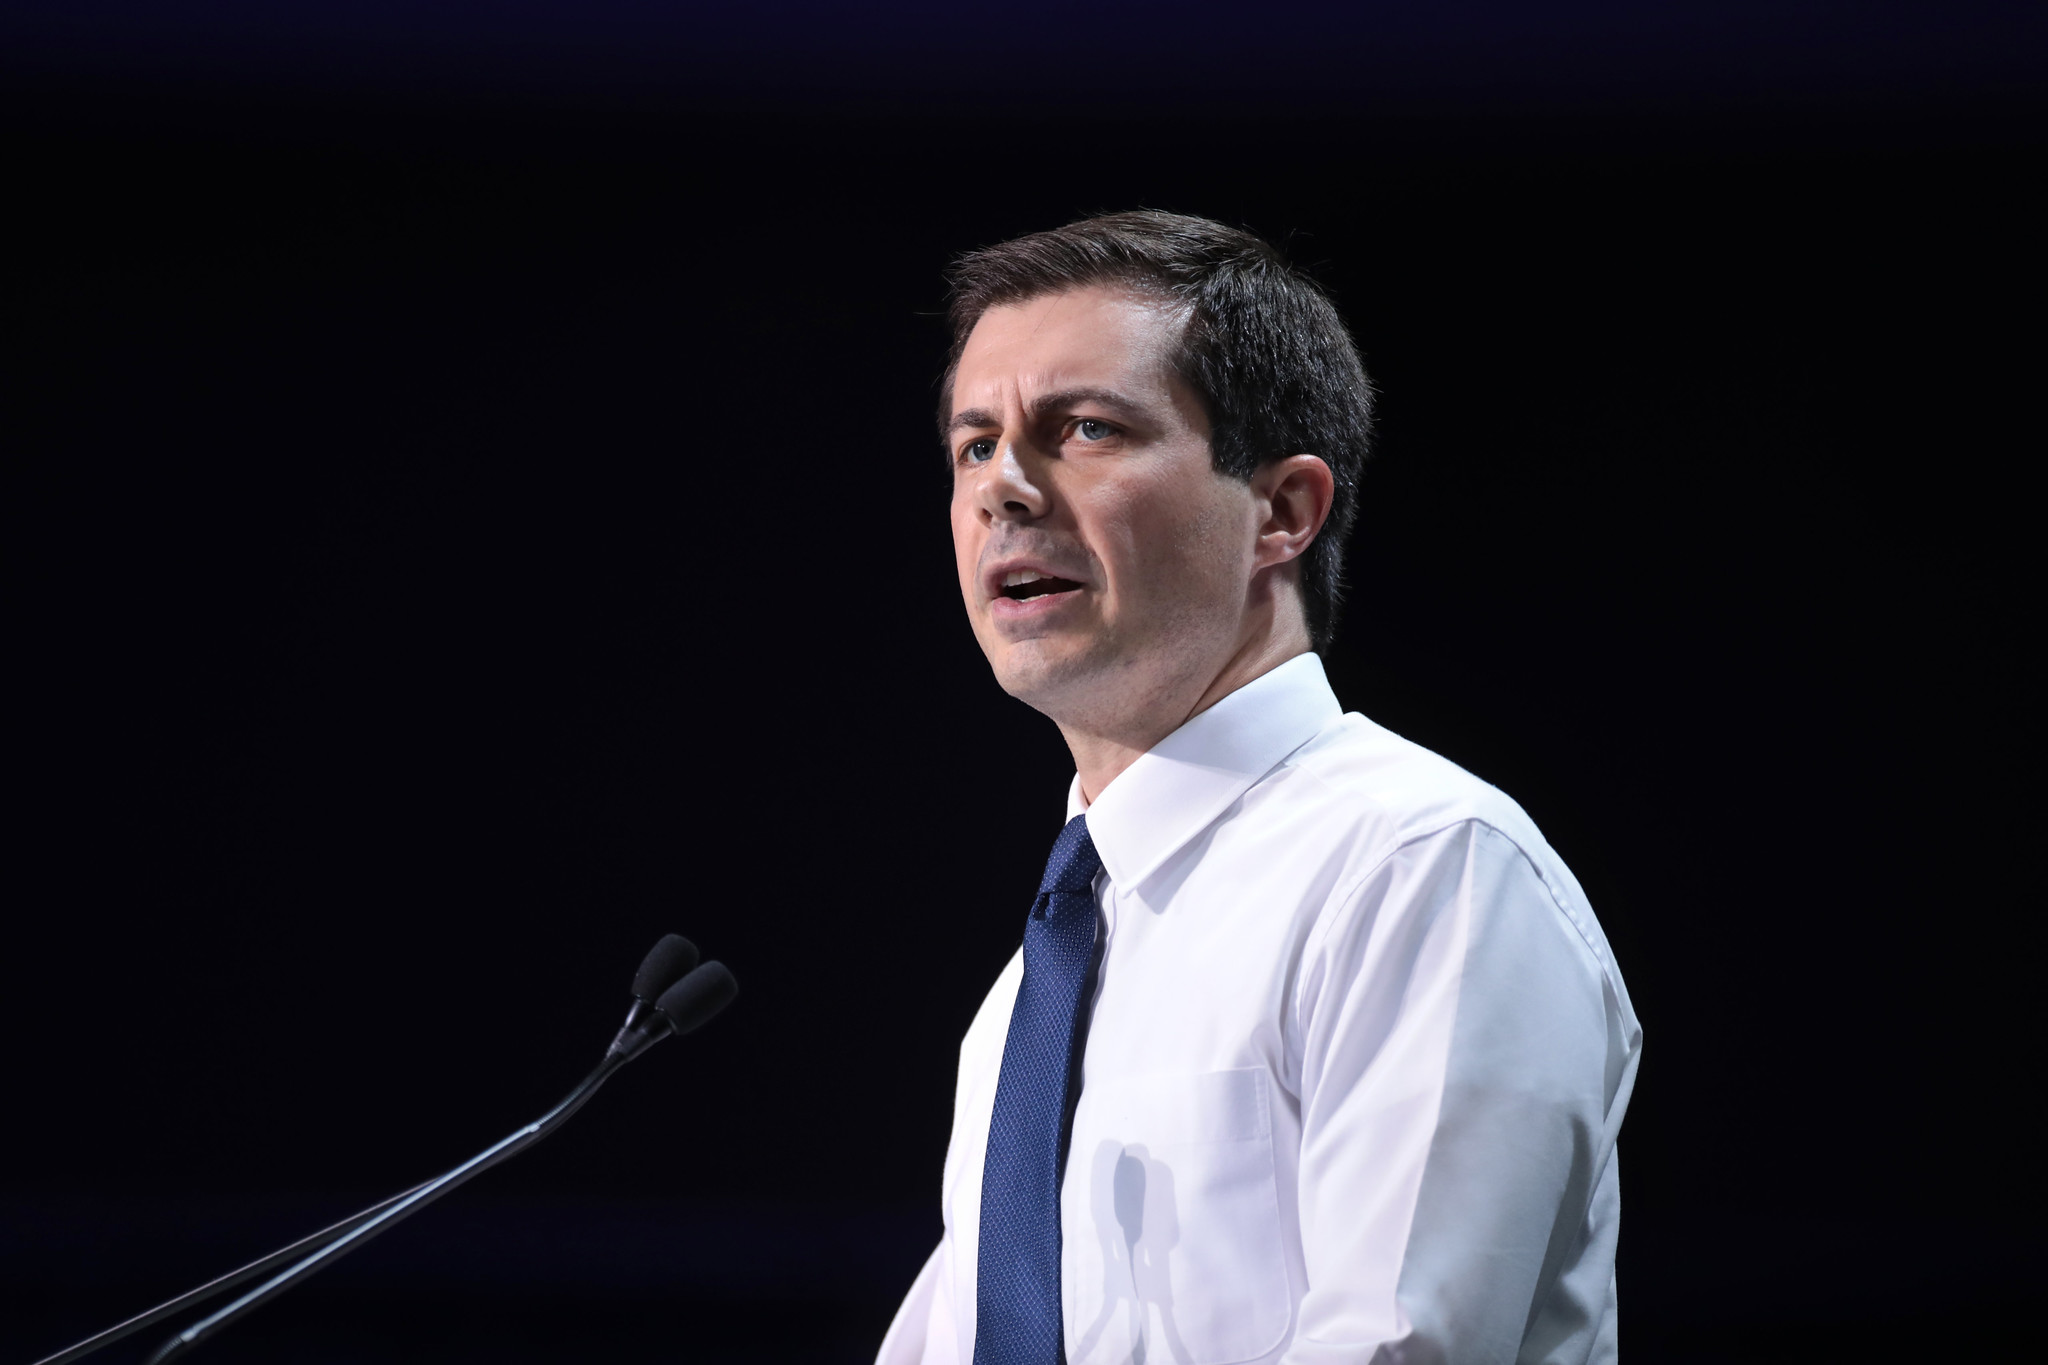 Pete Buttigieg Begins to Frame His Foreign Policy